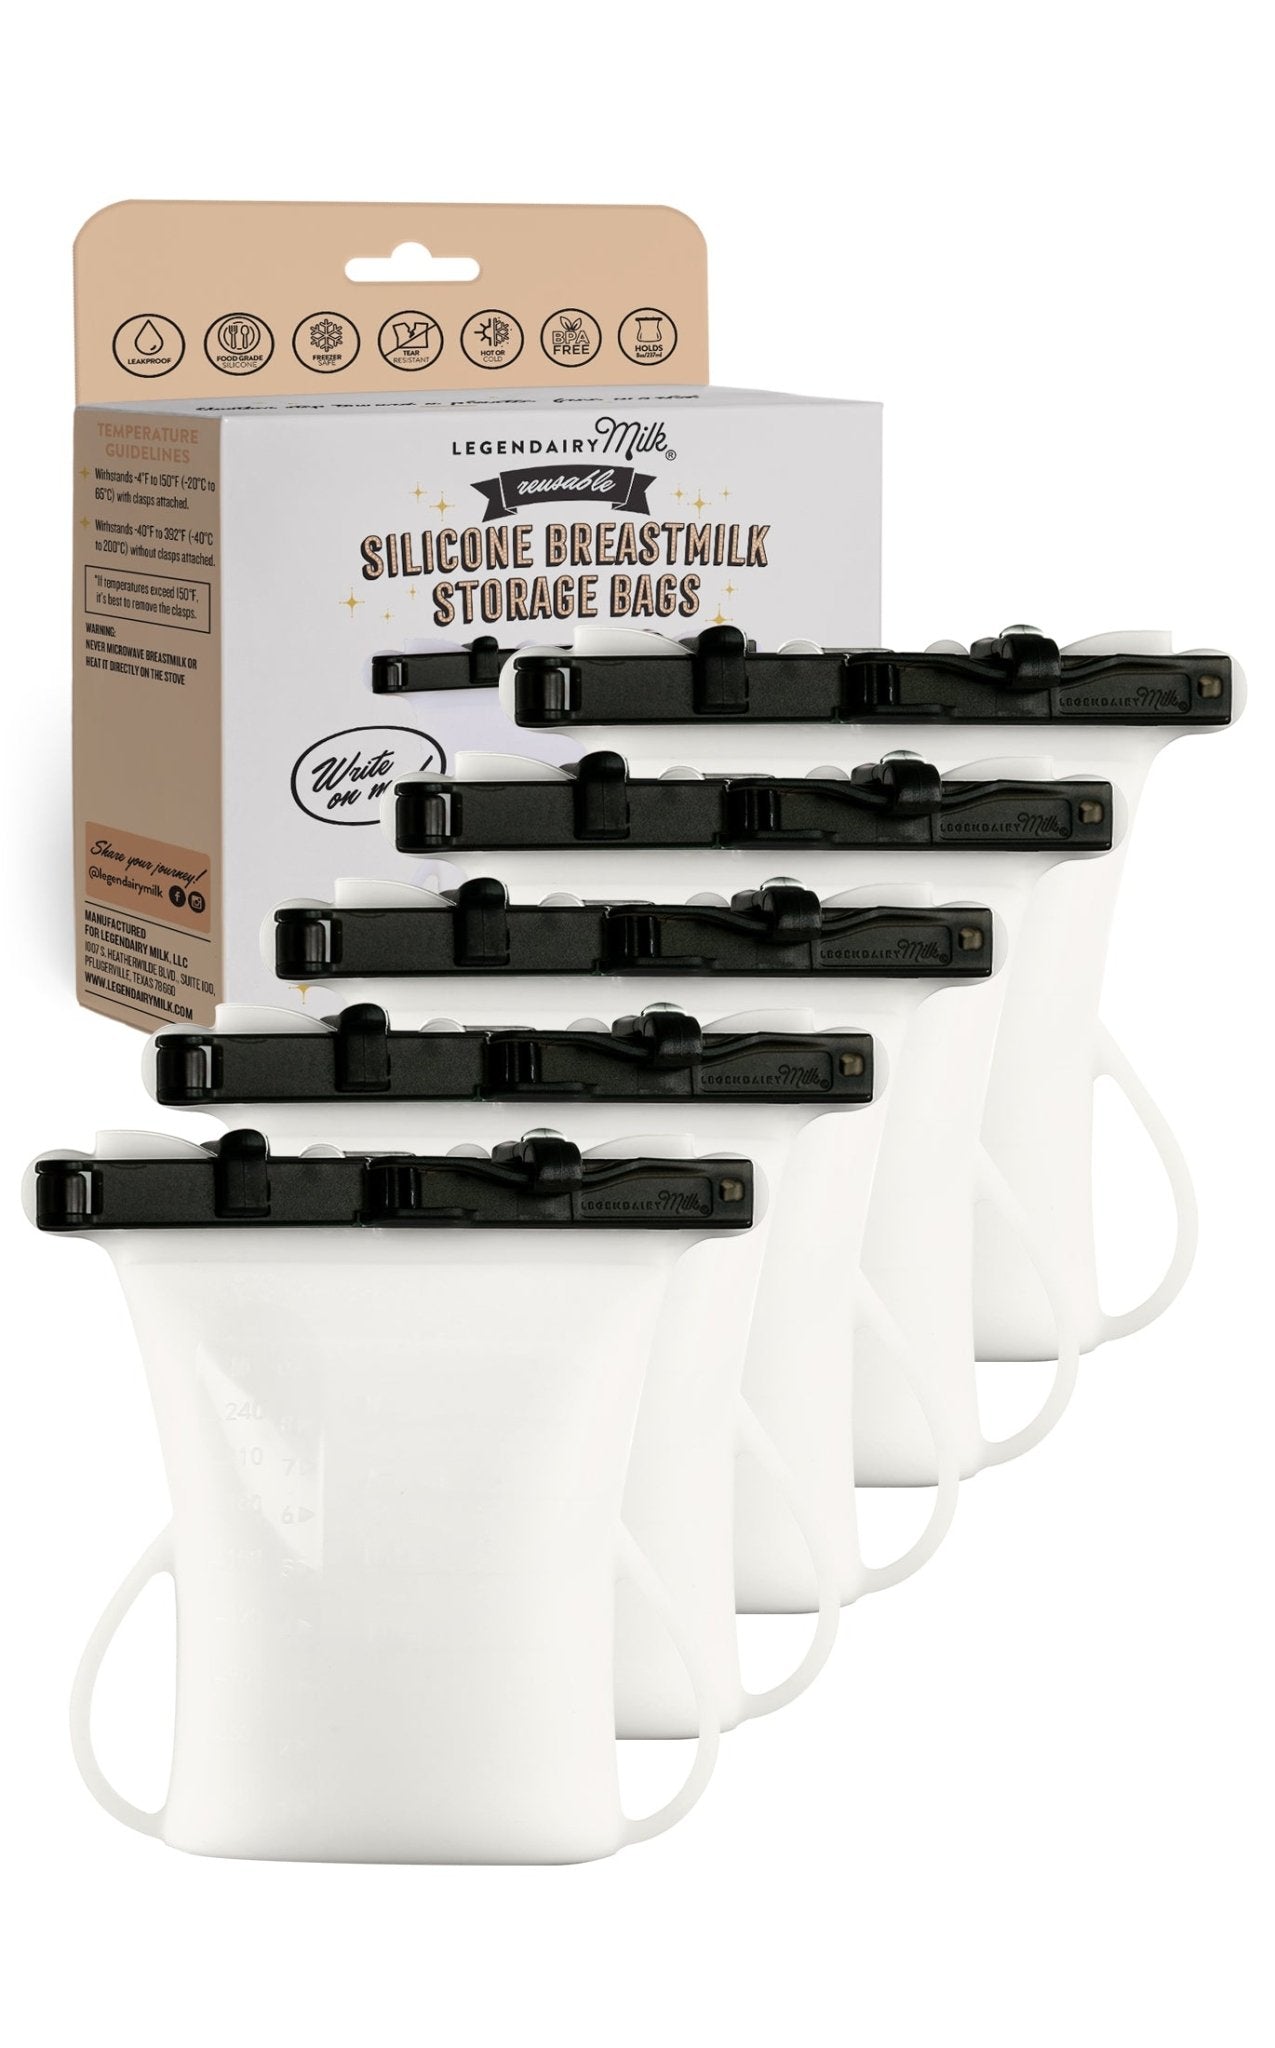 New item at my store: reusable silicone food storage bags : r